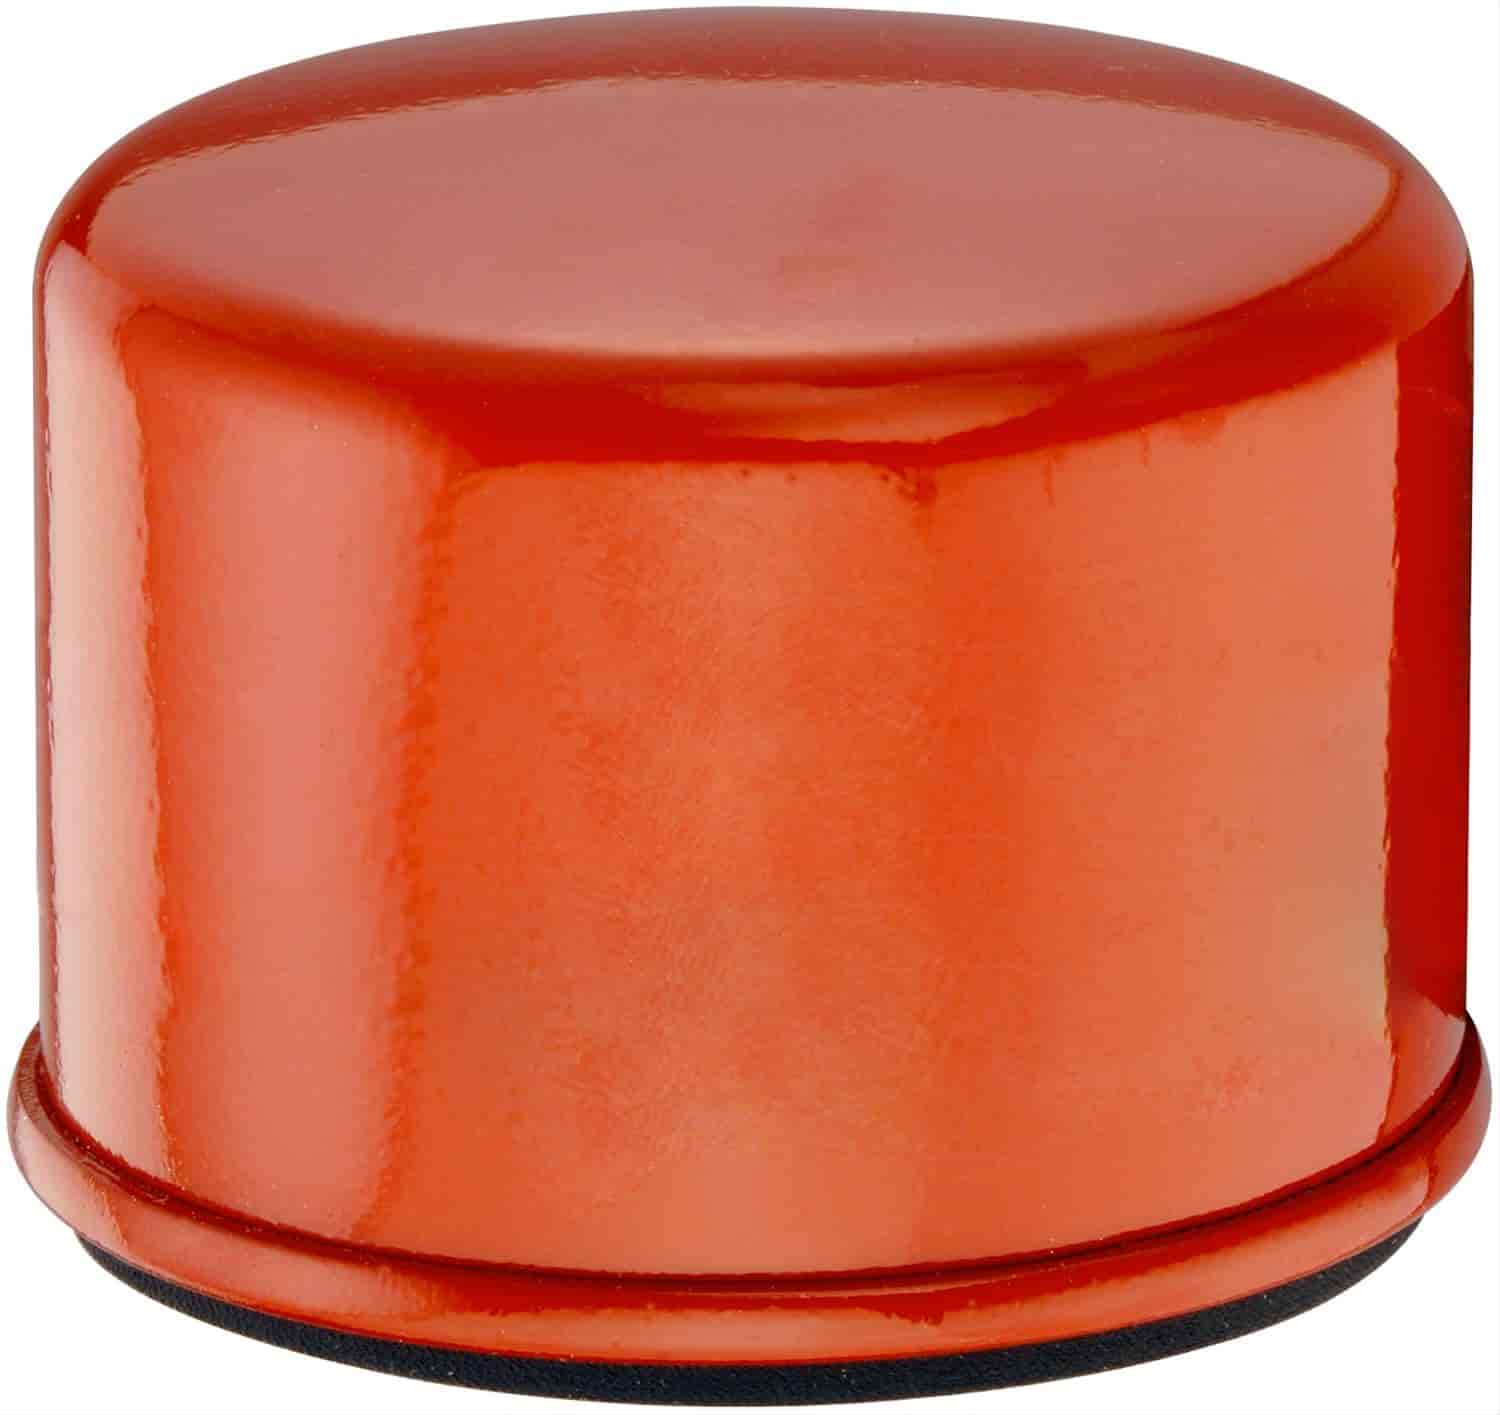 HD Spin-On Oil Filter